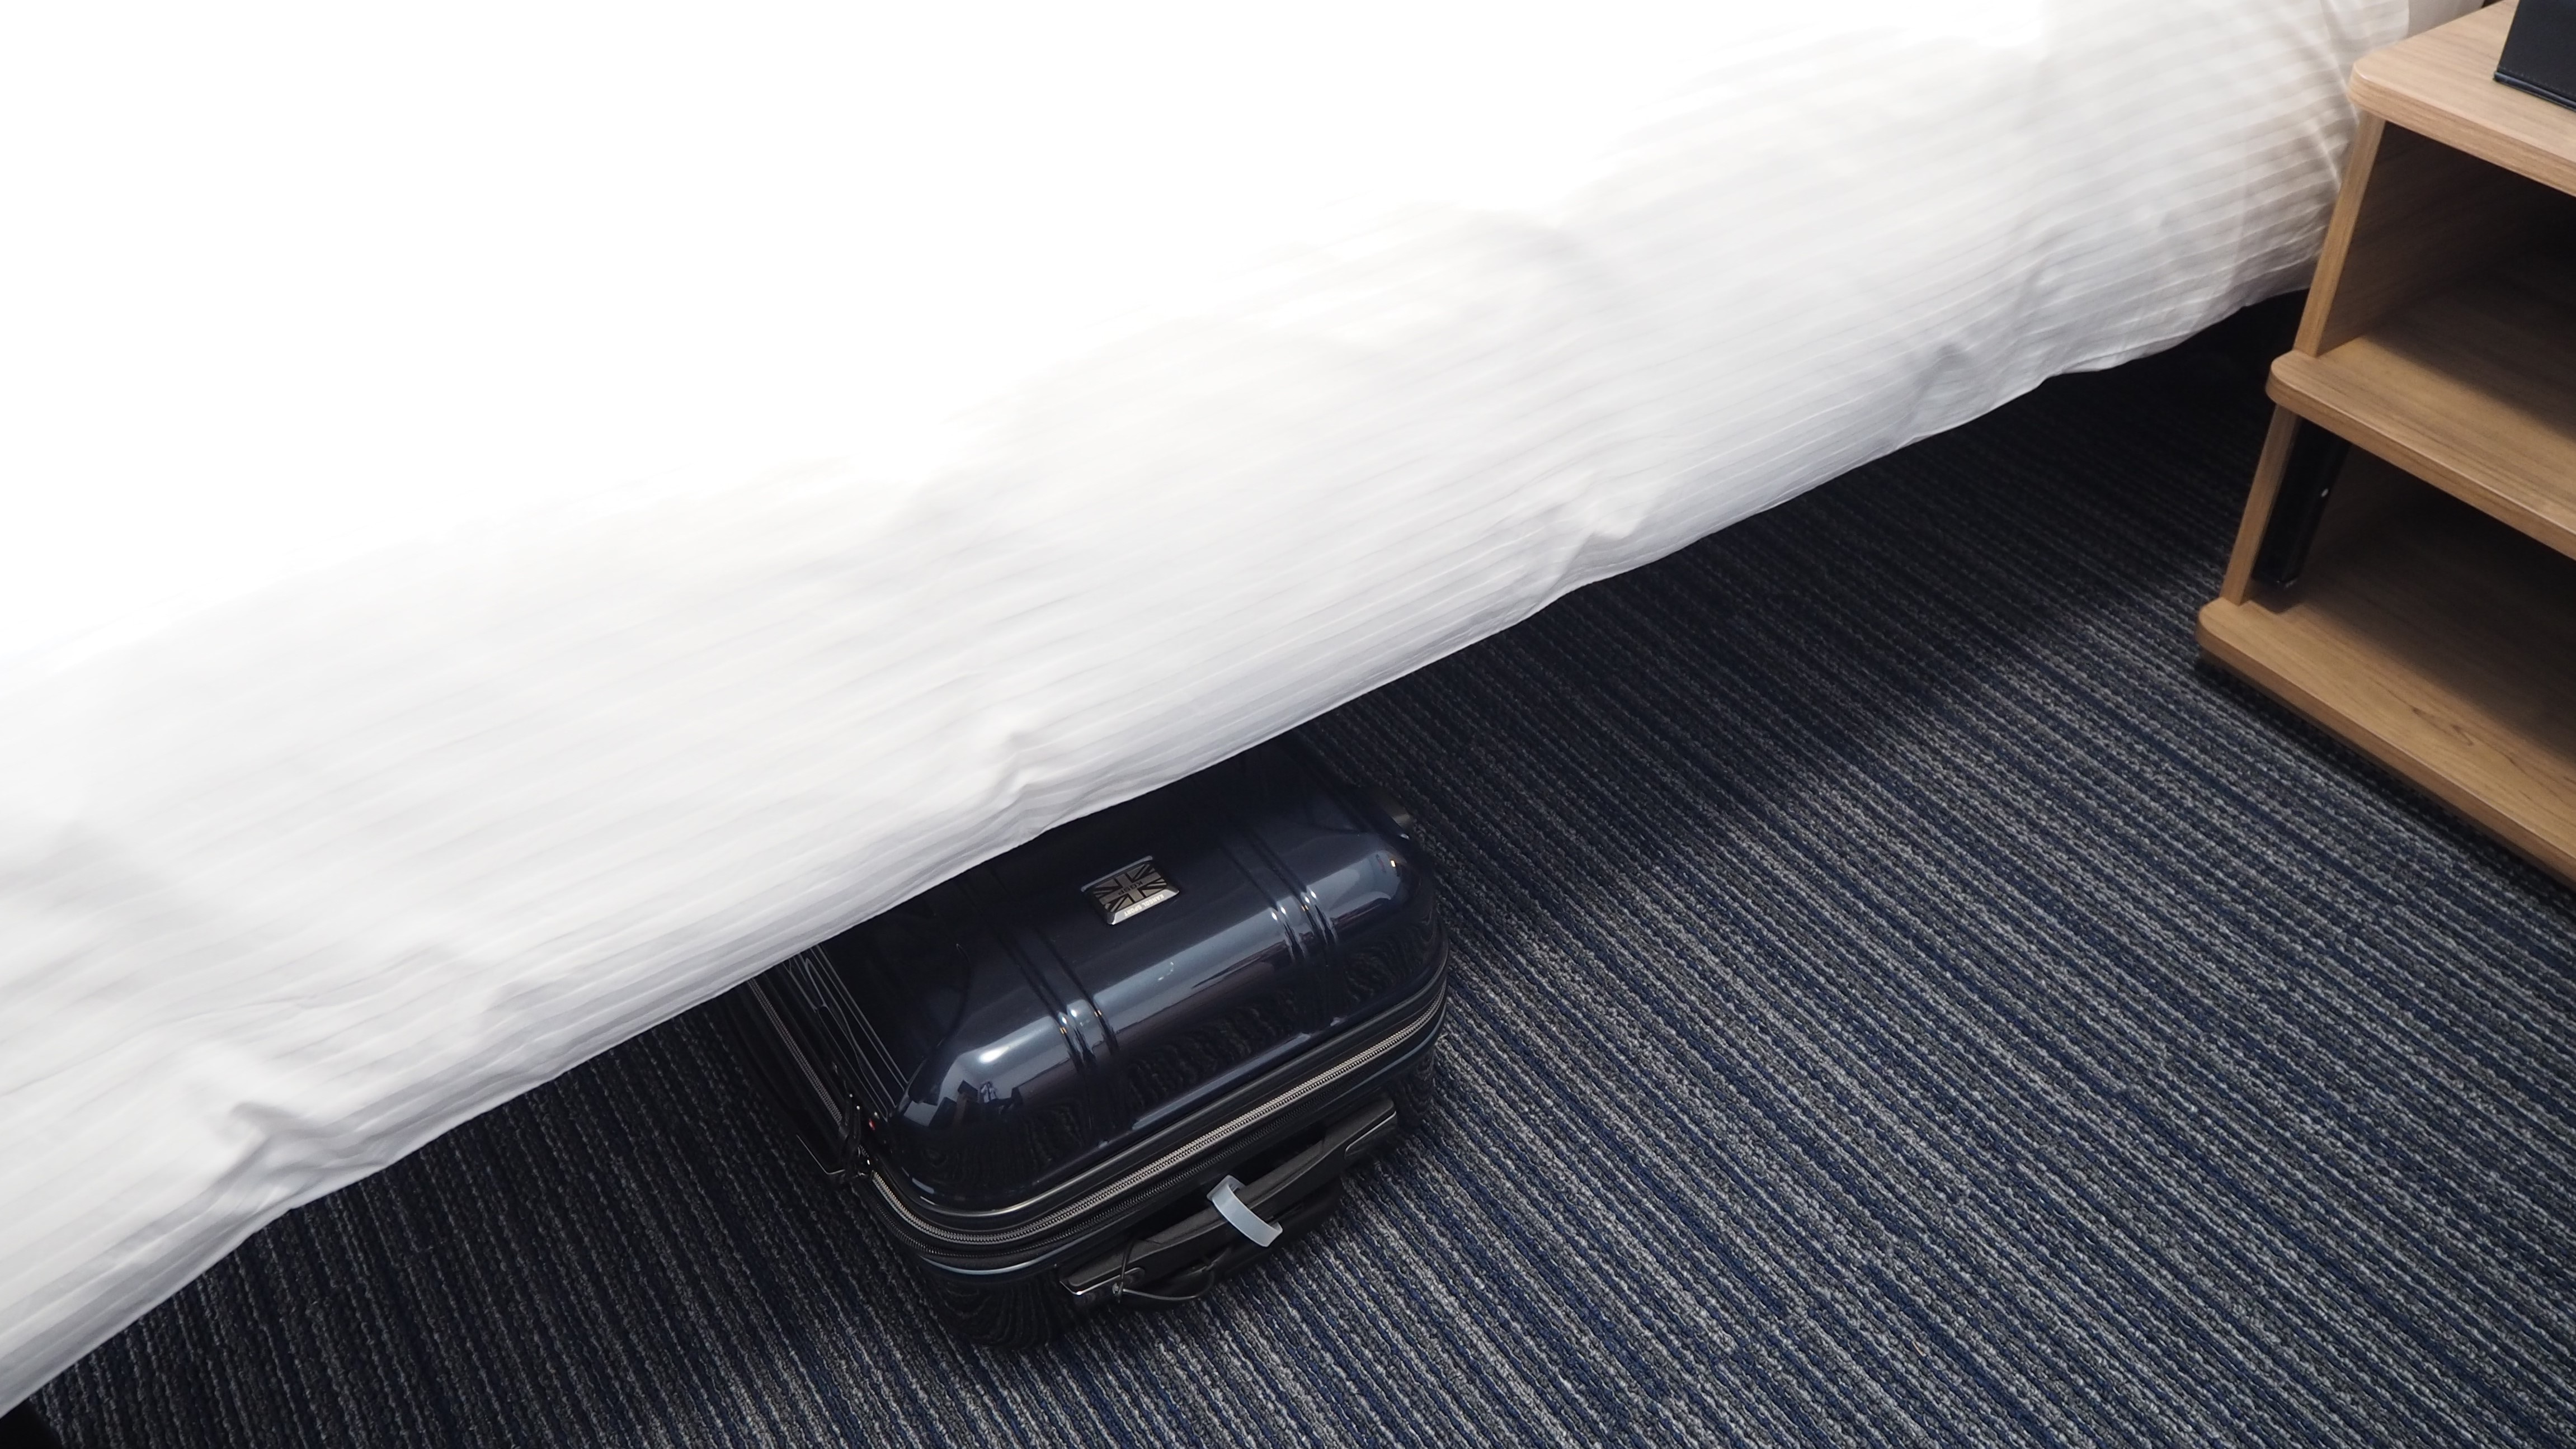 You can store a carry case under the bed